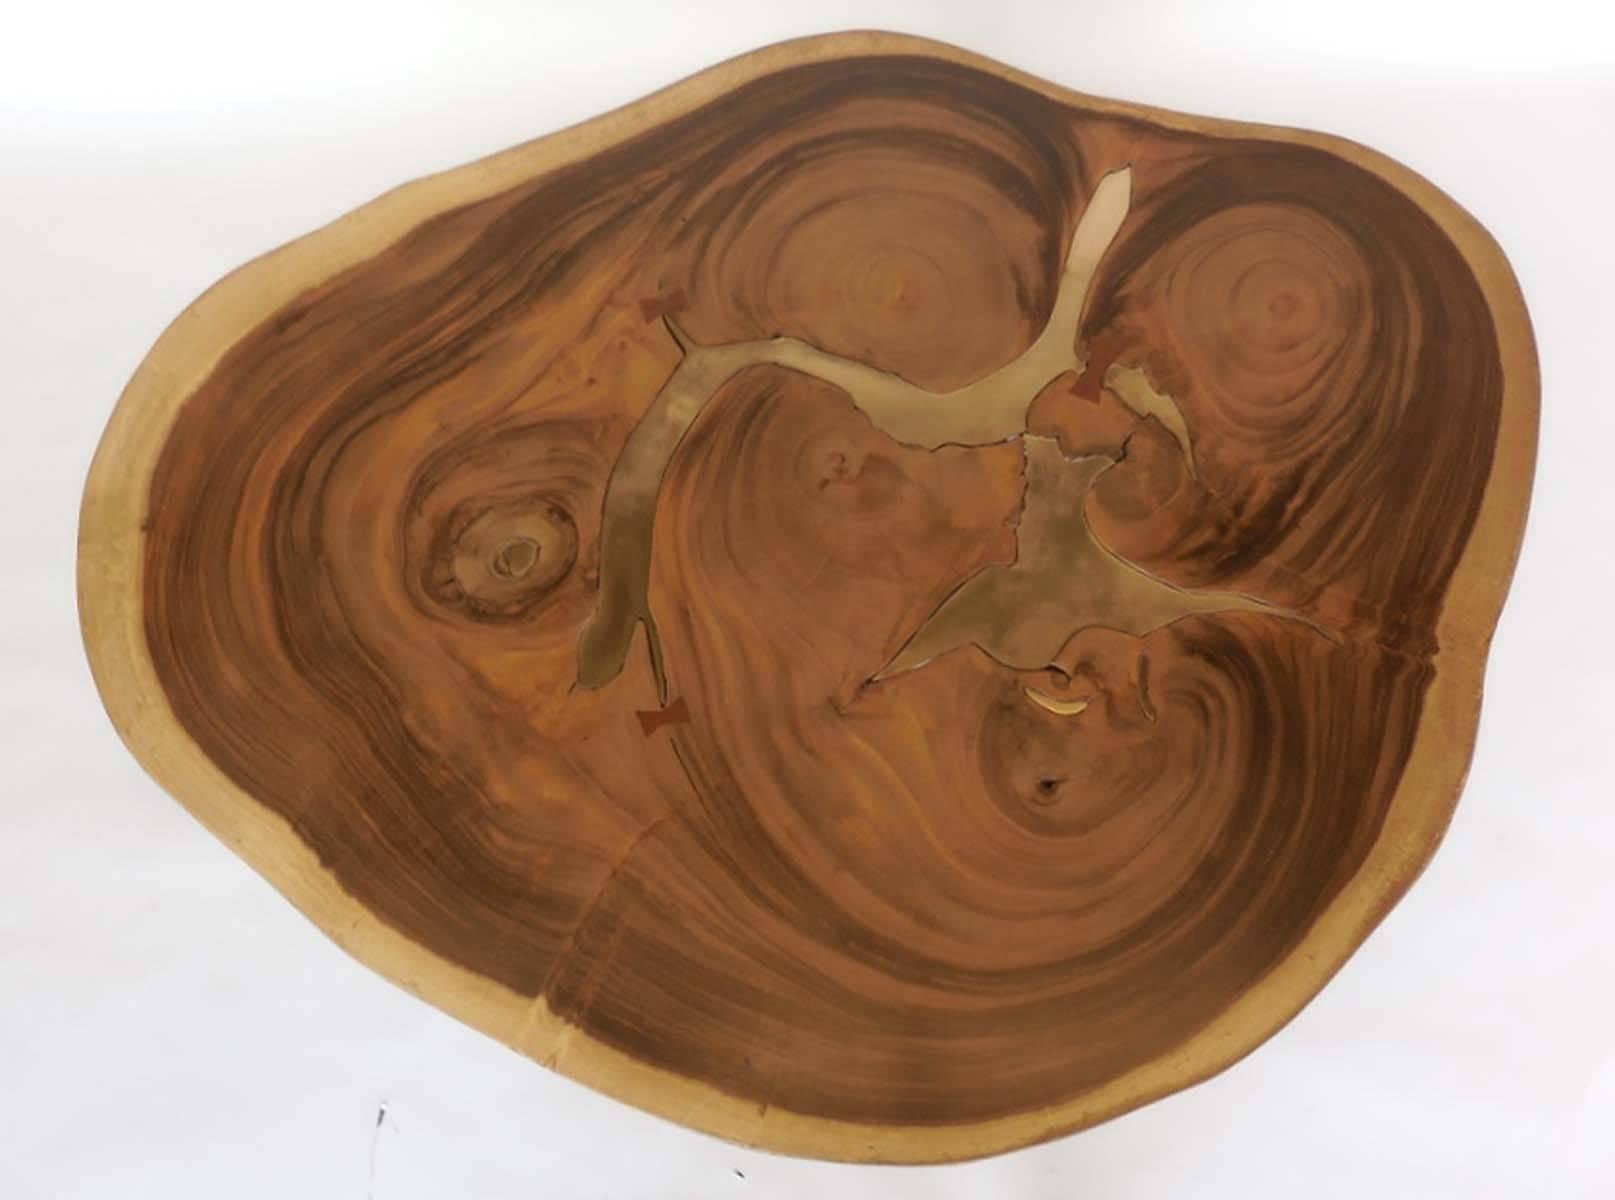 Sagitally cut slab of Albezia wood with bronze inlay. Atop hand-forged tripod base with bronze tips. Beautiful swirly wood grain and wonderful brown and beige hues. Made in Los Angeles by Dos Gallos Studio.